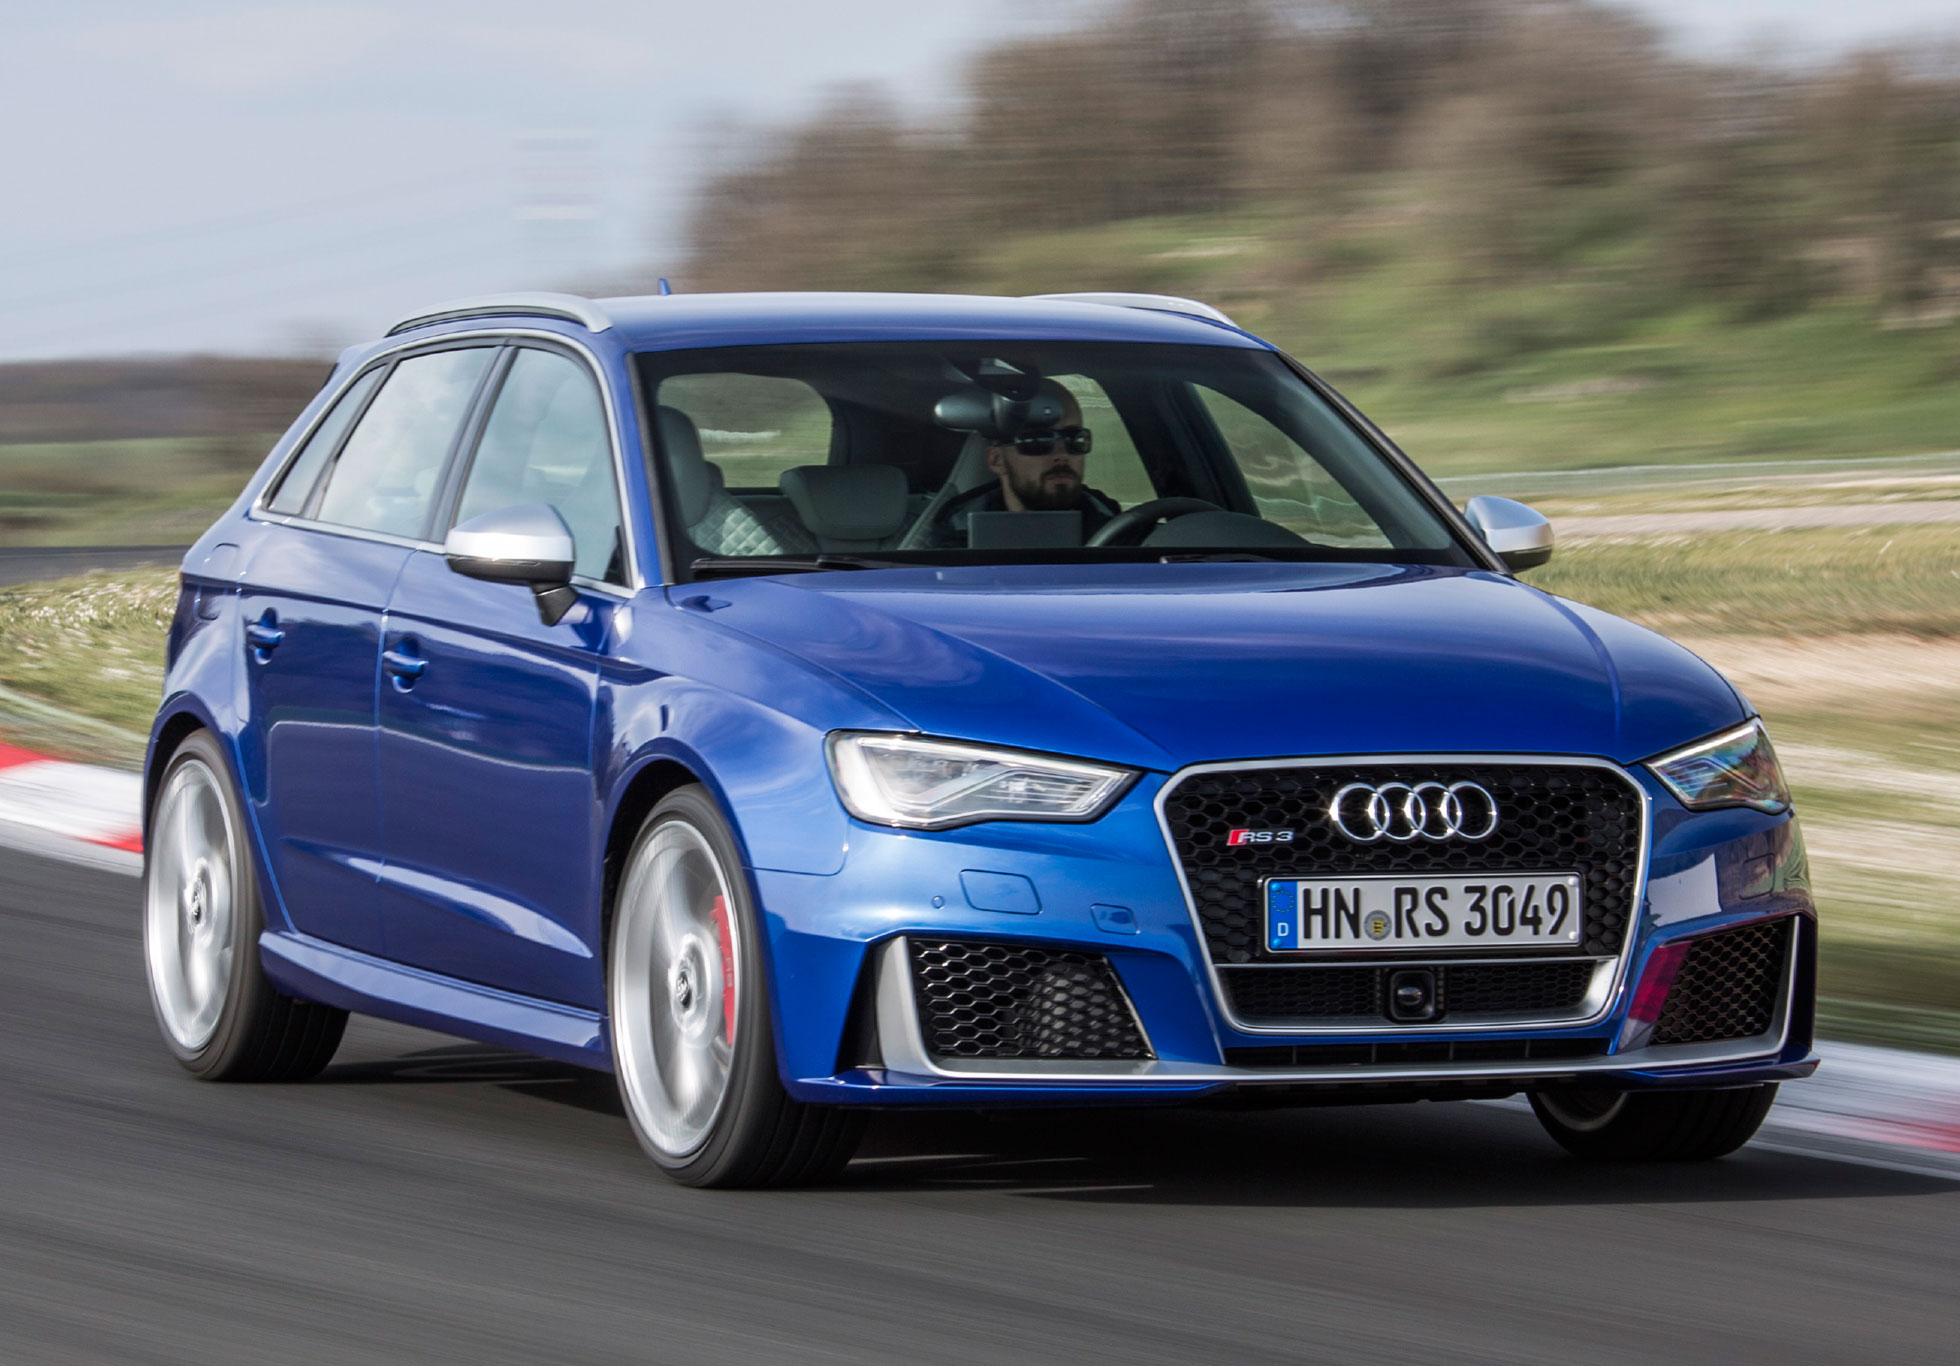 The new Audi RS3 Sportback punches well above its weight in performance ter...